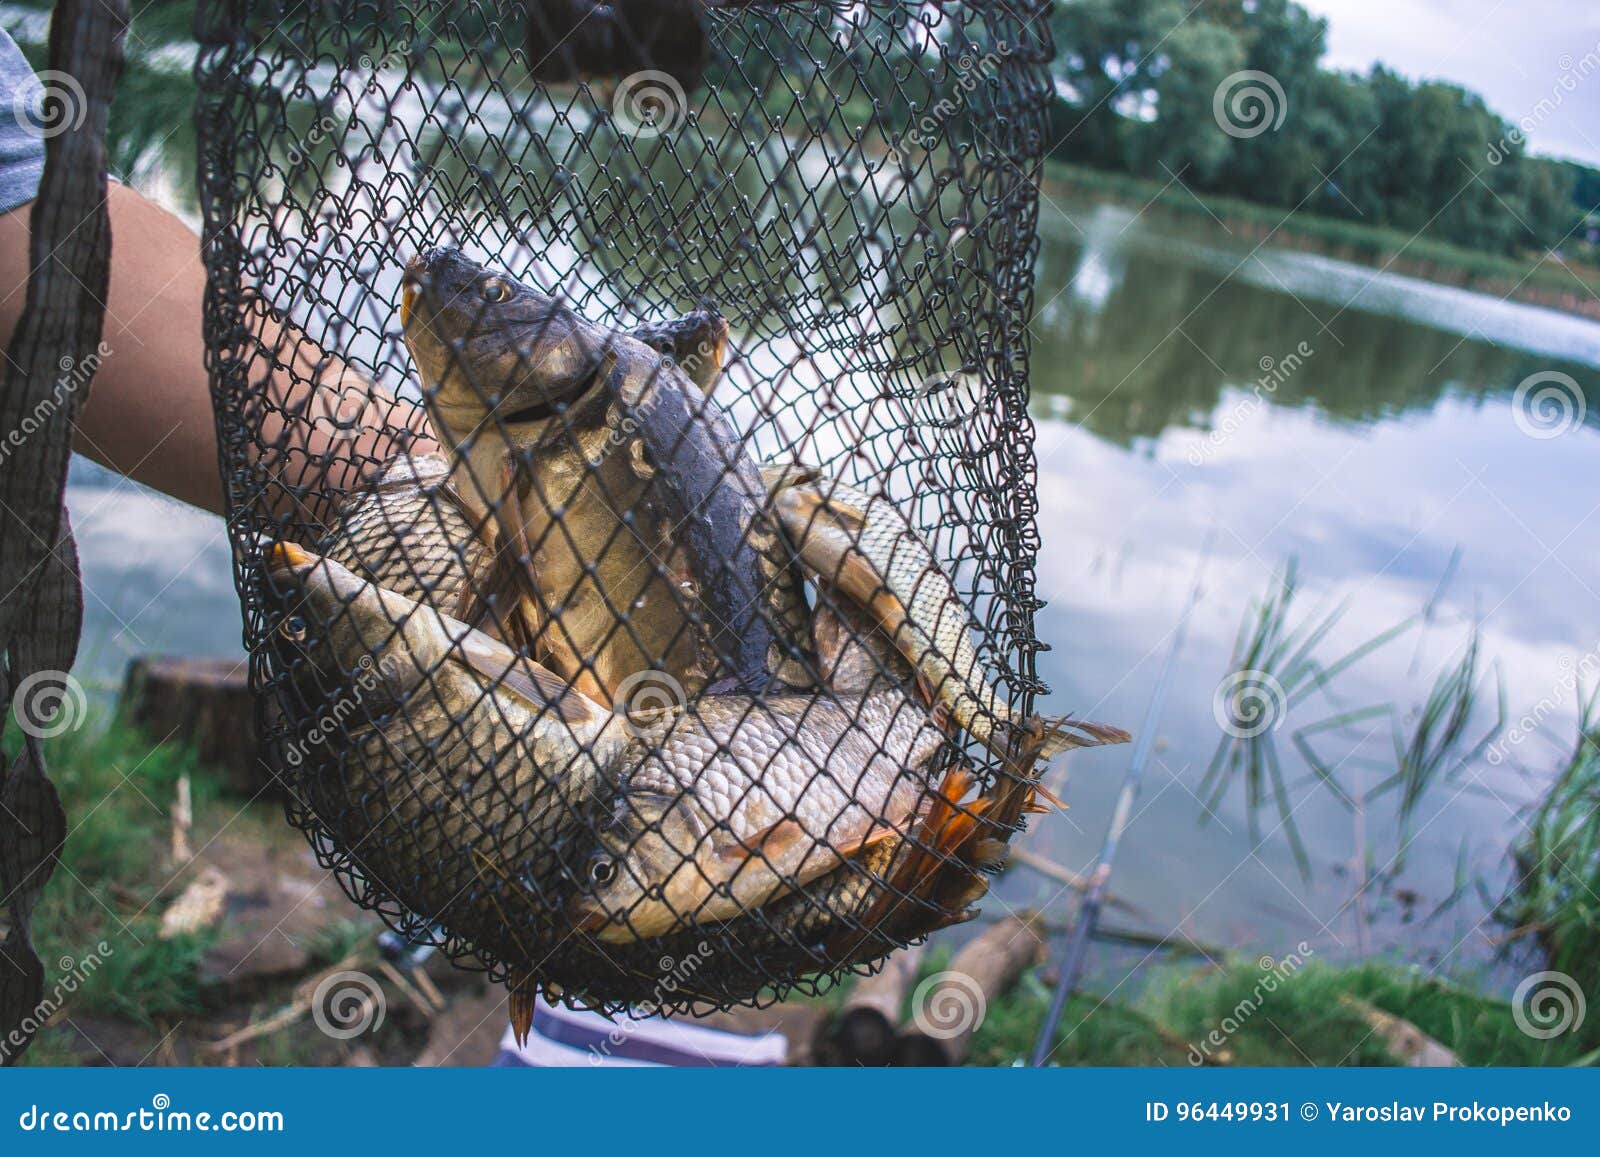 Fisherman`s Catch Fish in Nets on the Pond. Stock Image - Image of